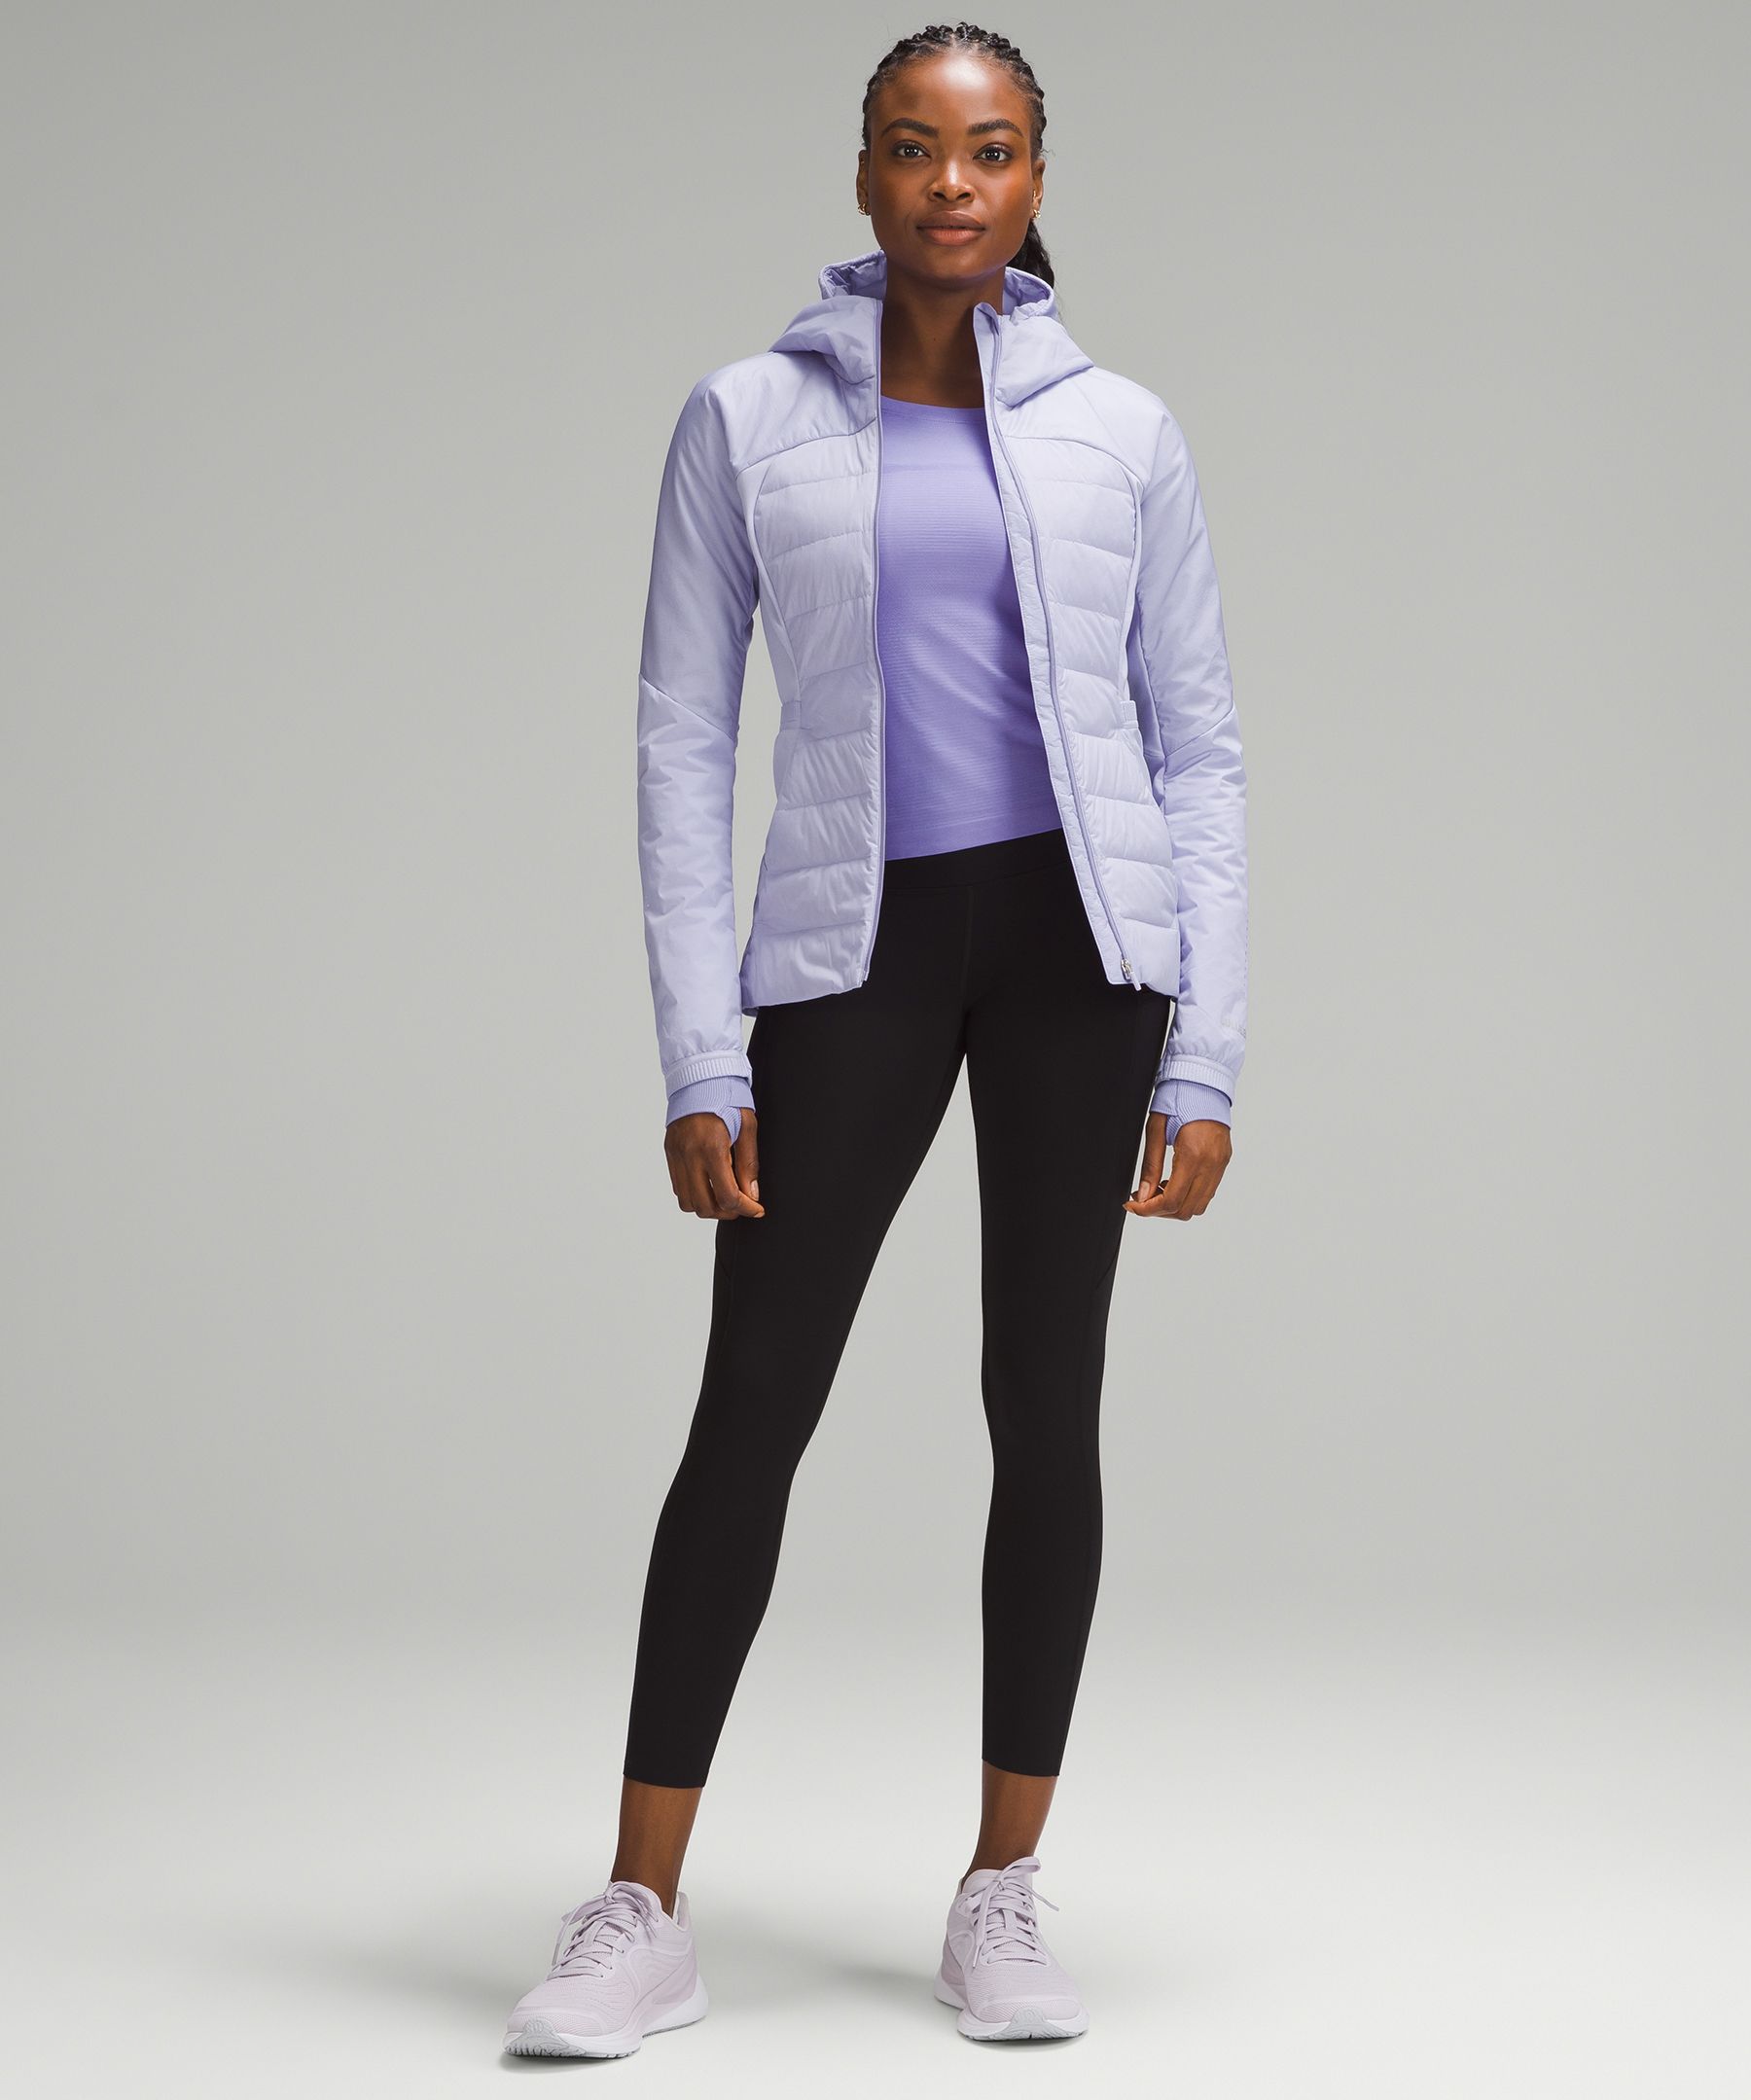 Fit pics - Down For It All Jacket (4) & Cross Chill Jacket (4) : r